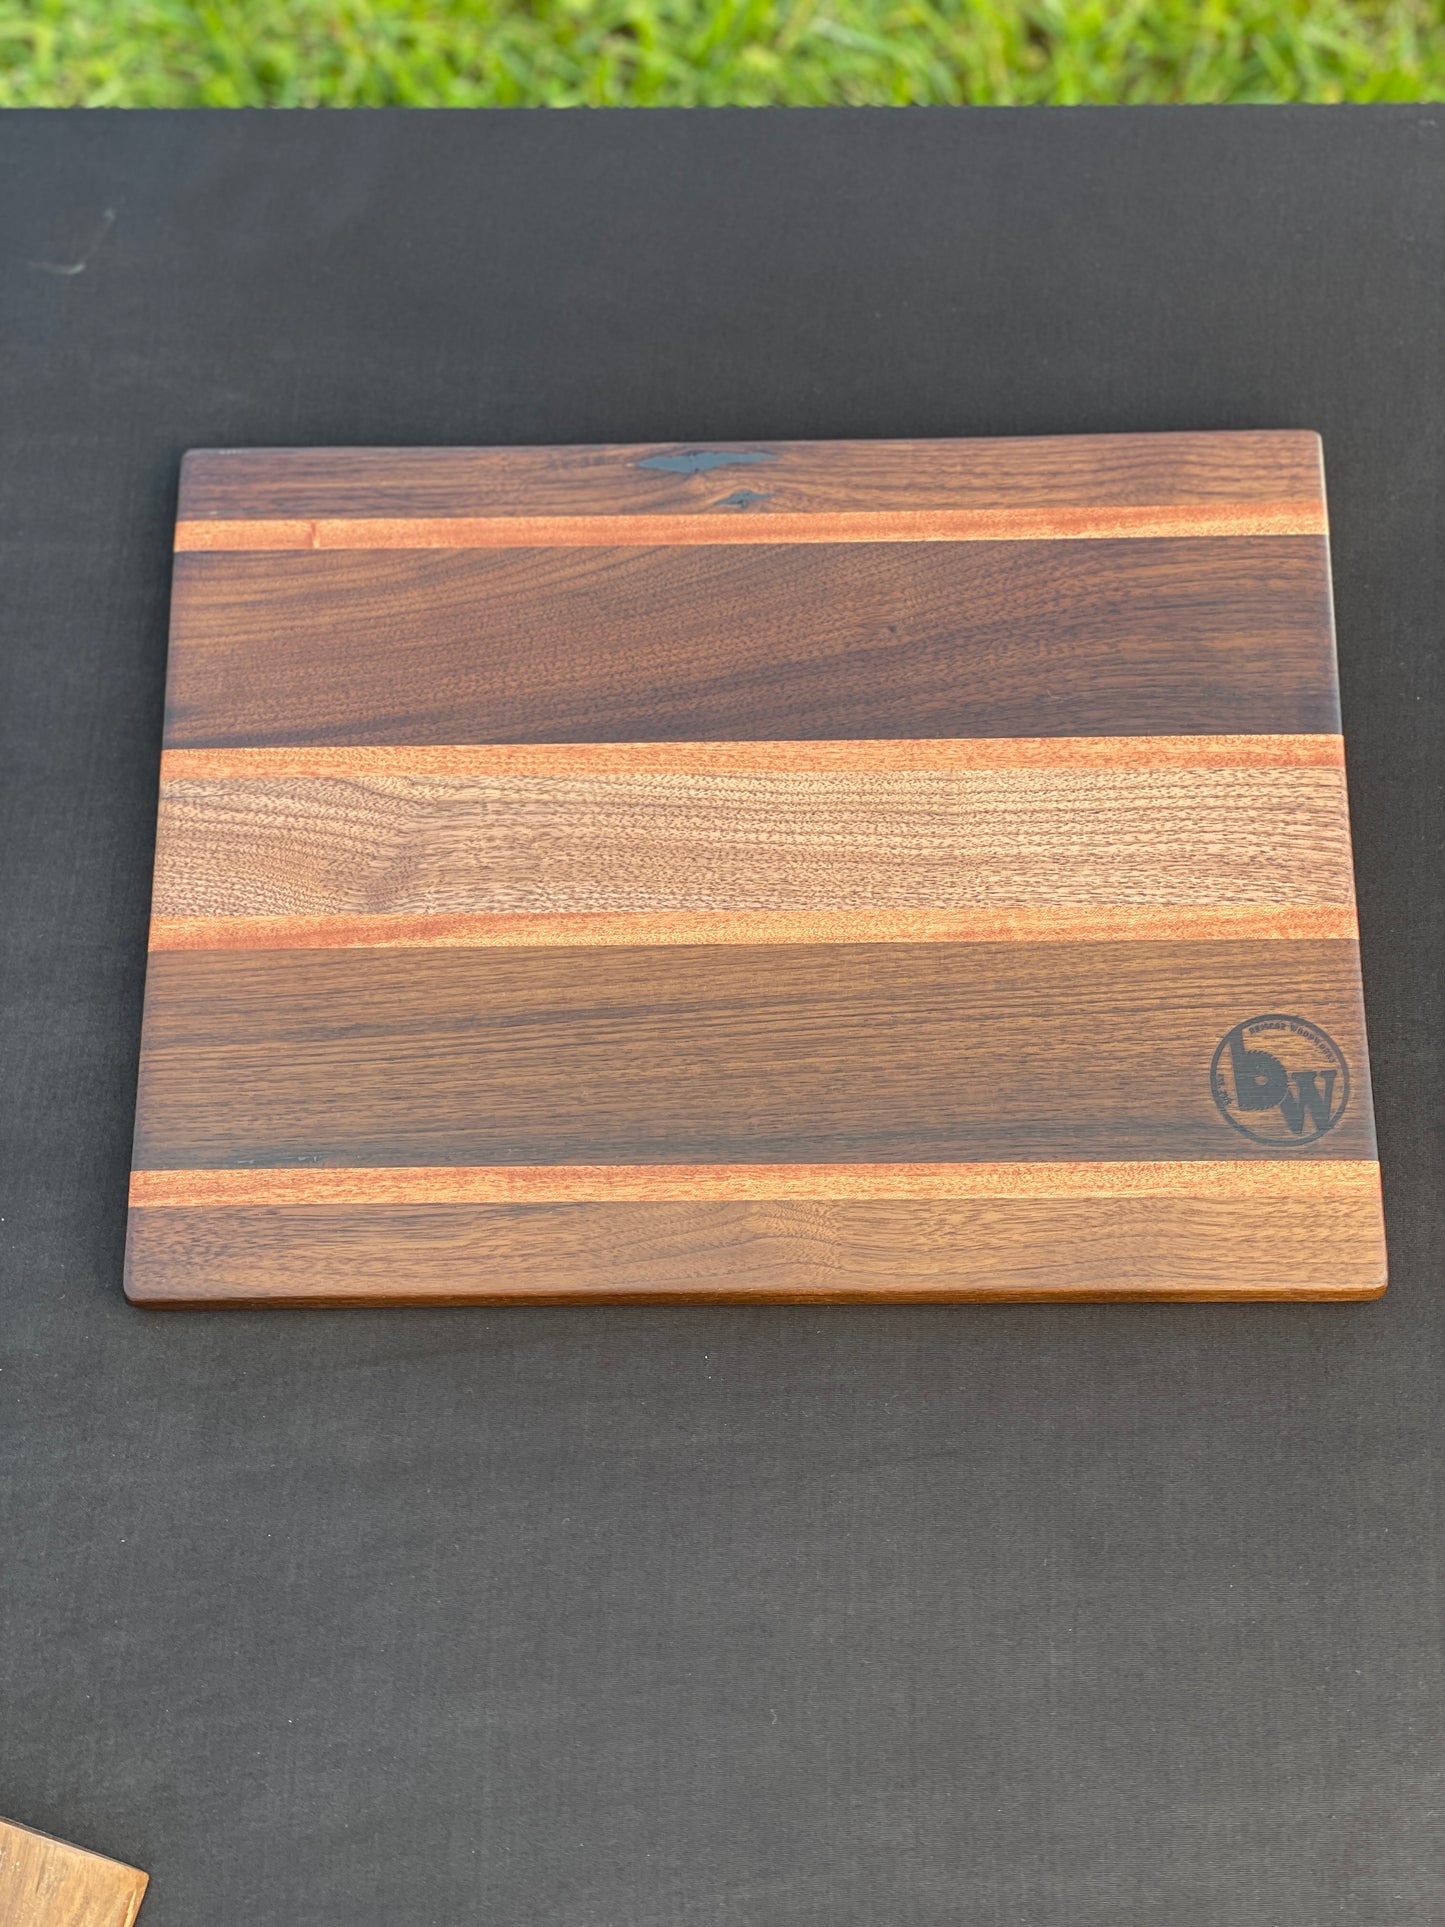 Cutting board - Unique and various styles